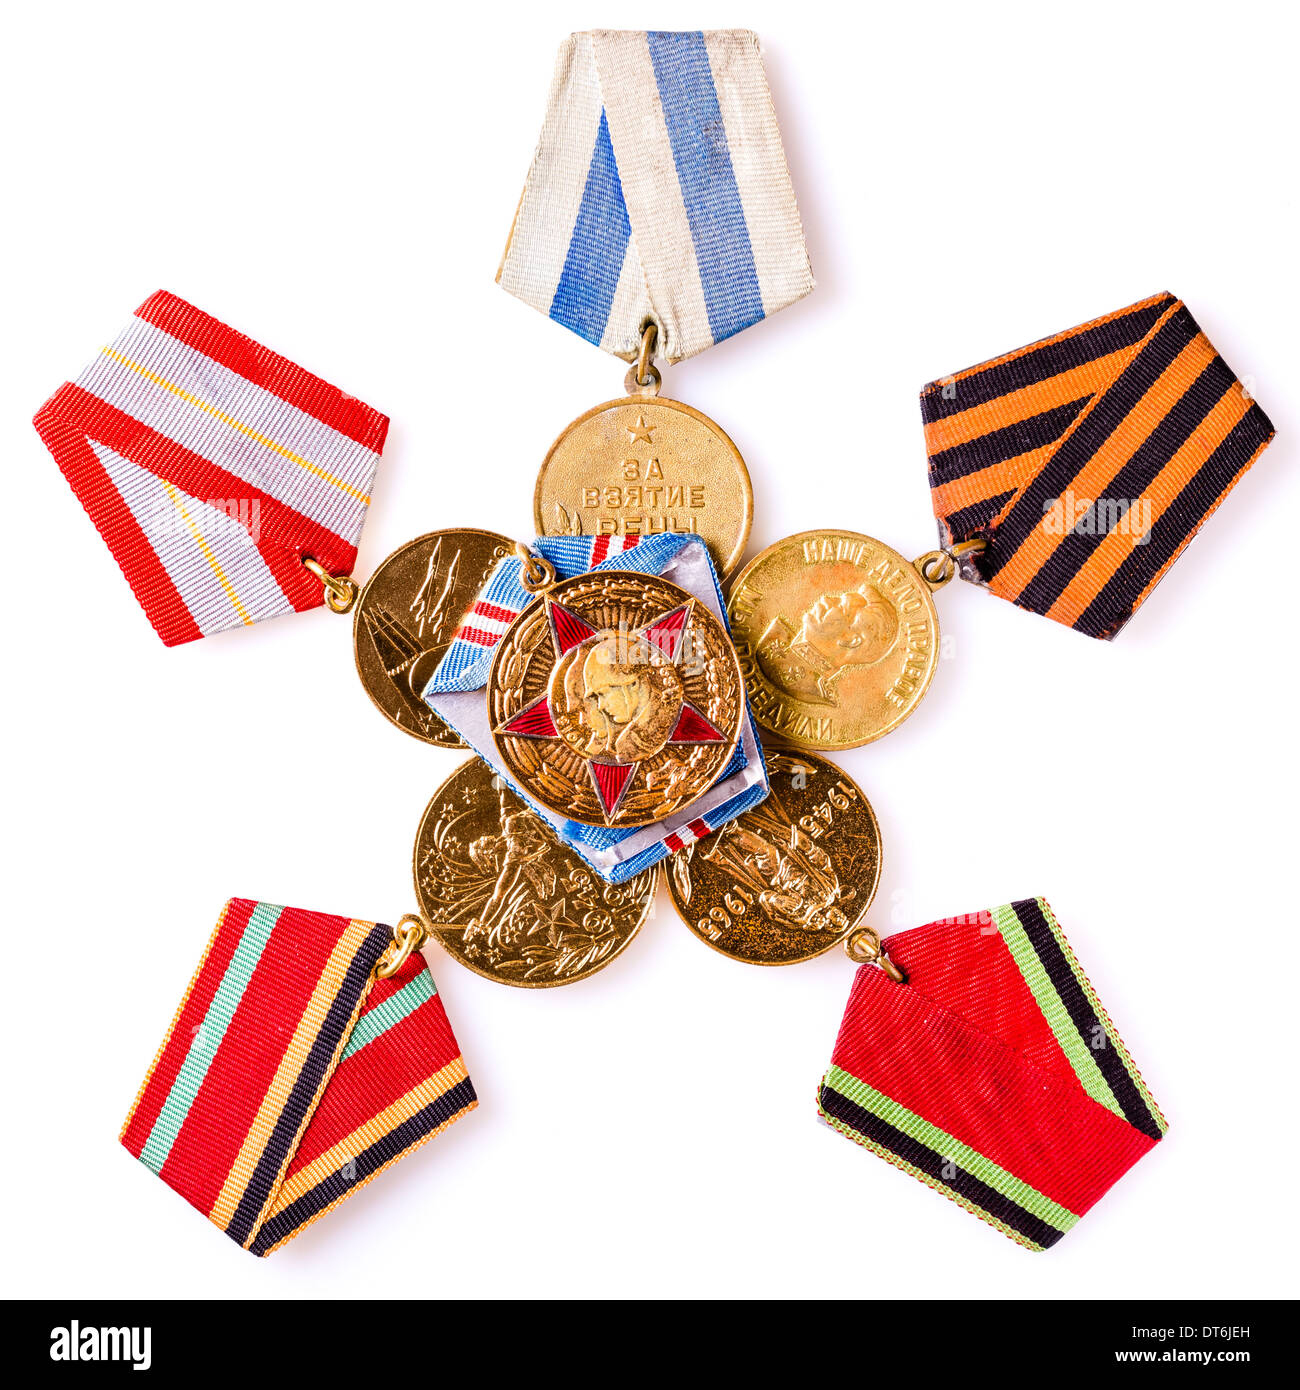 MINSK, BELARUS - FEB 06: Collection of Russian (soviet) medals for participation in the Second World War, February 06, 2014. Stock Photo